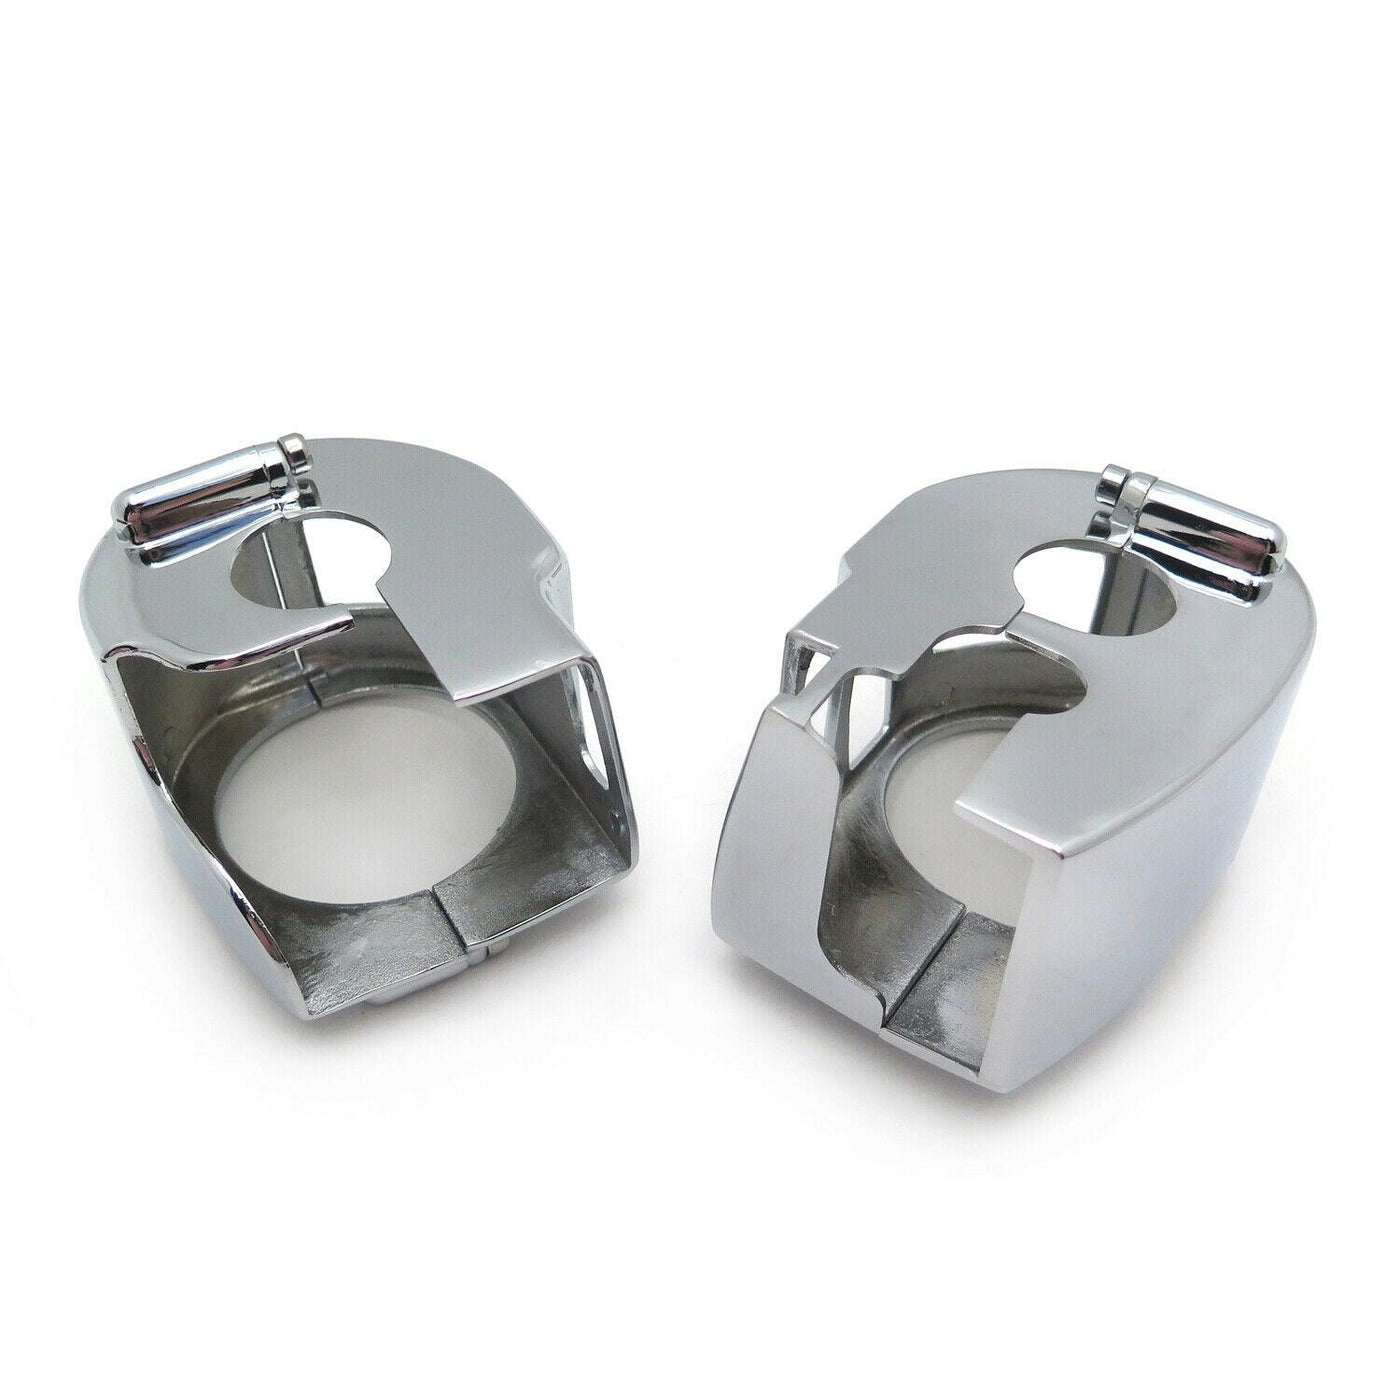 Chrome Switch Housing Cover For 1999-2012 Yamaha Xvs V-Star 1100 Classic Xvs1100 - Moto Life Products